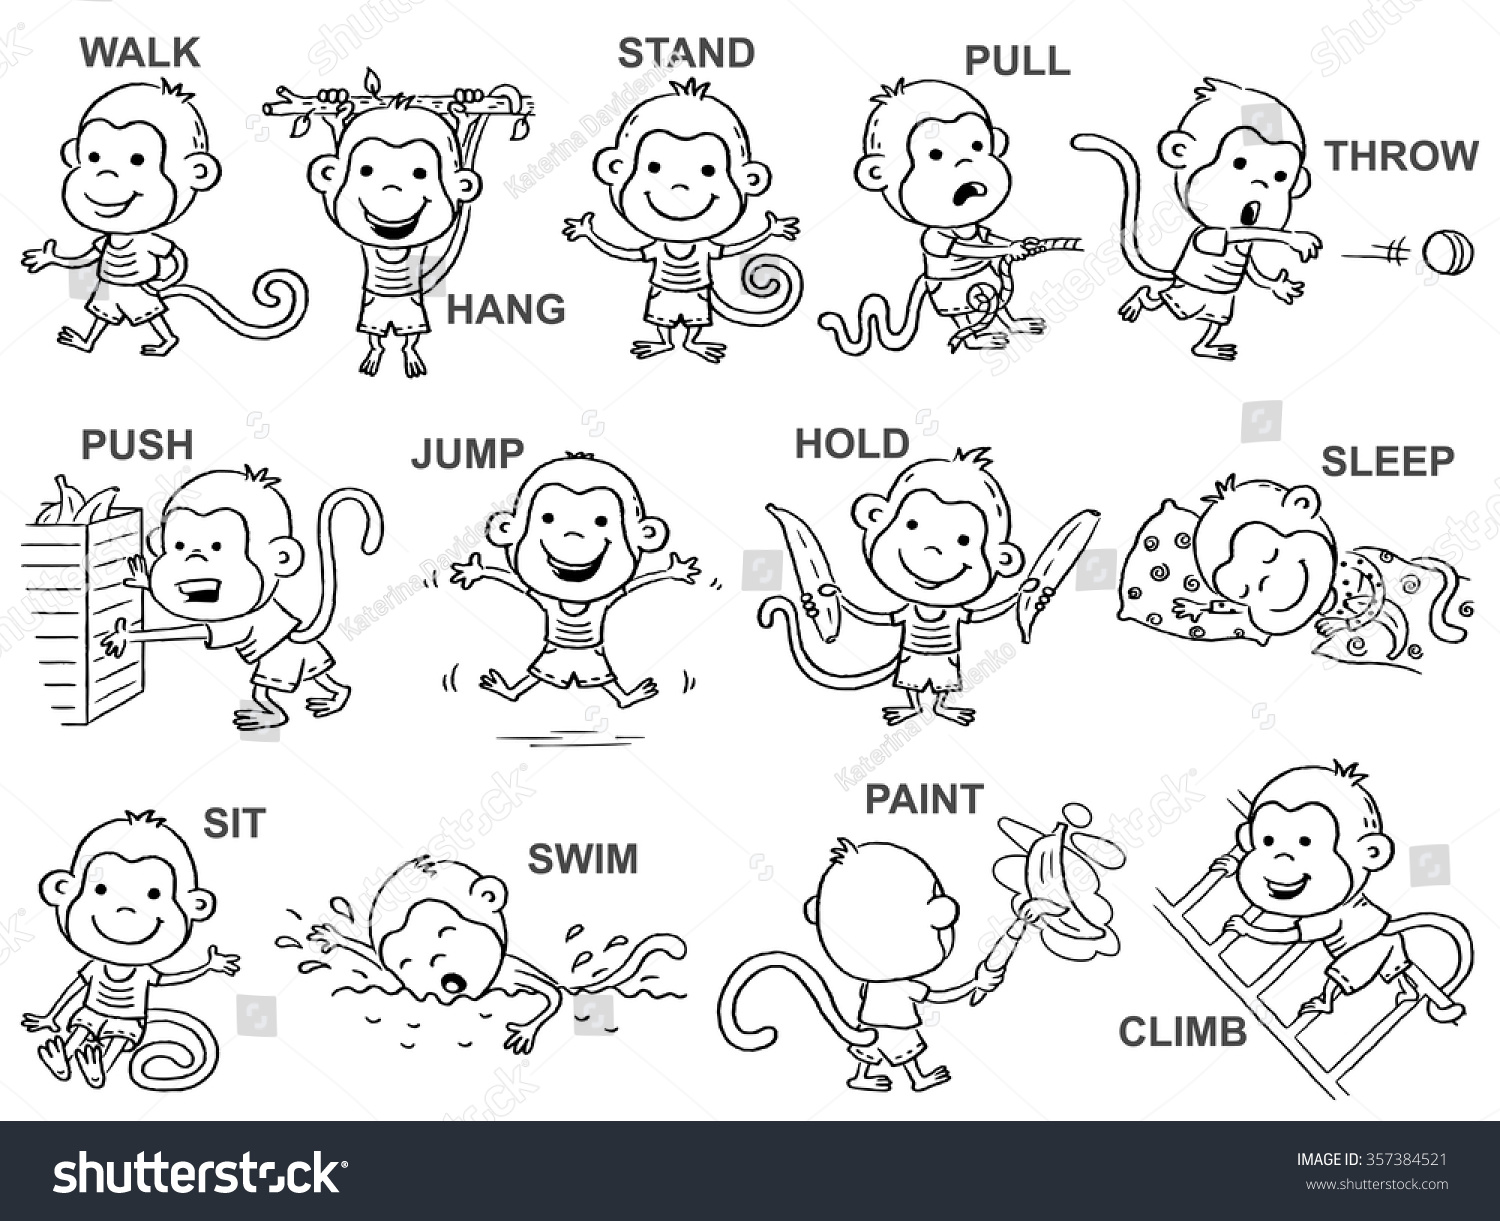 action word clip art - photo #40